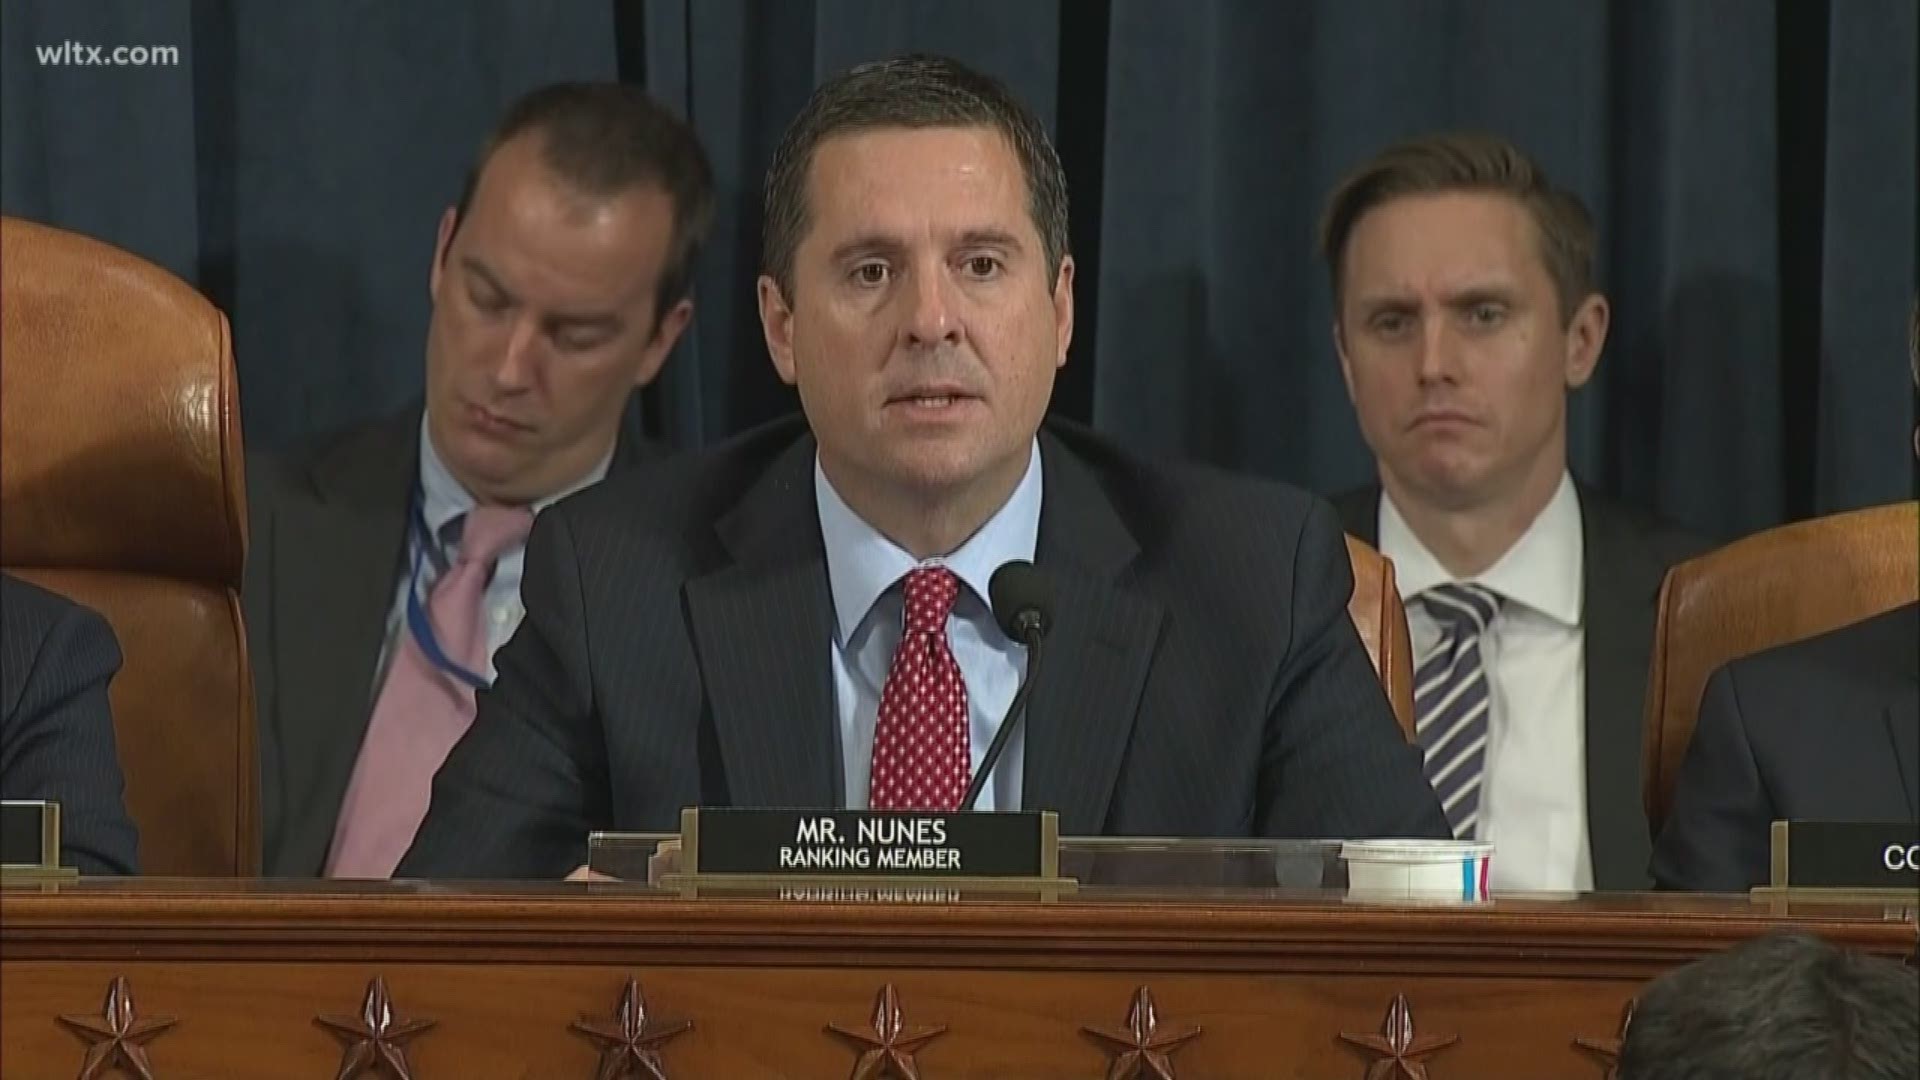 Rep. Devin Nunes (R-California) gave his opening statement at the impeachment hearings for President Donald Trump on November 13, 2019.